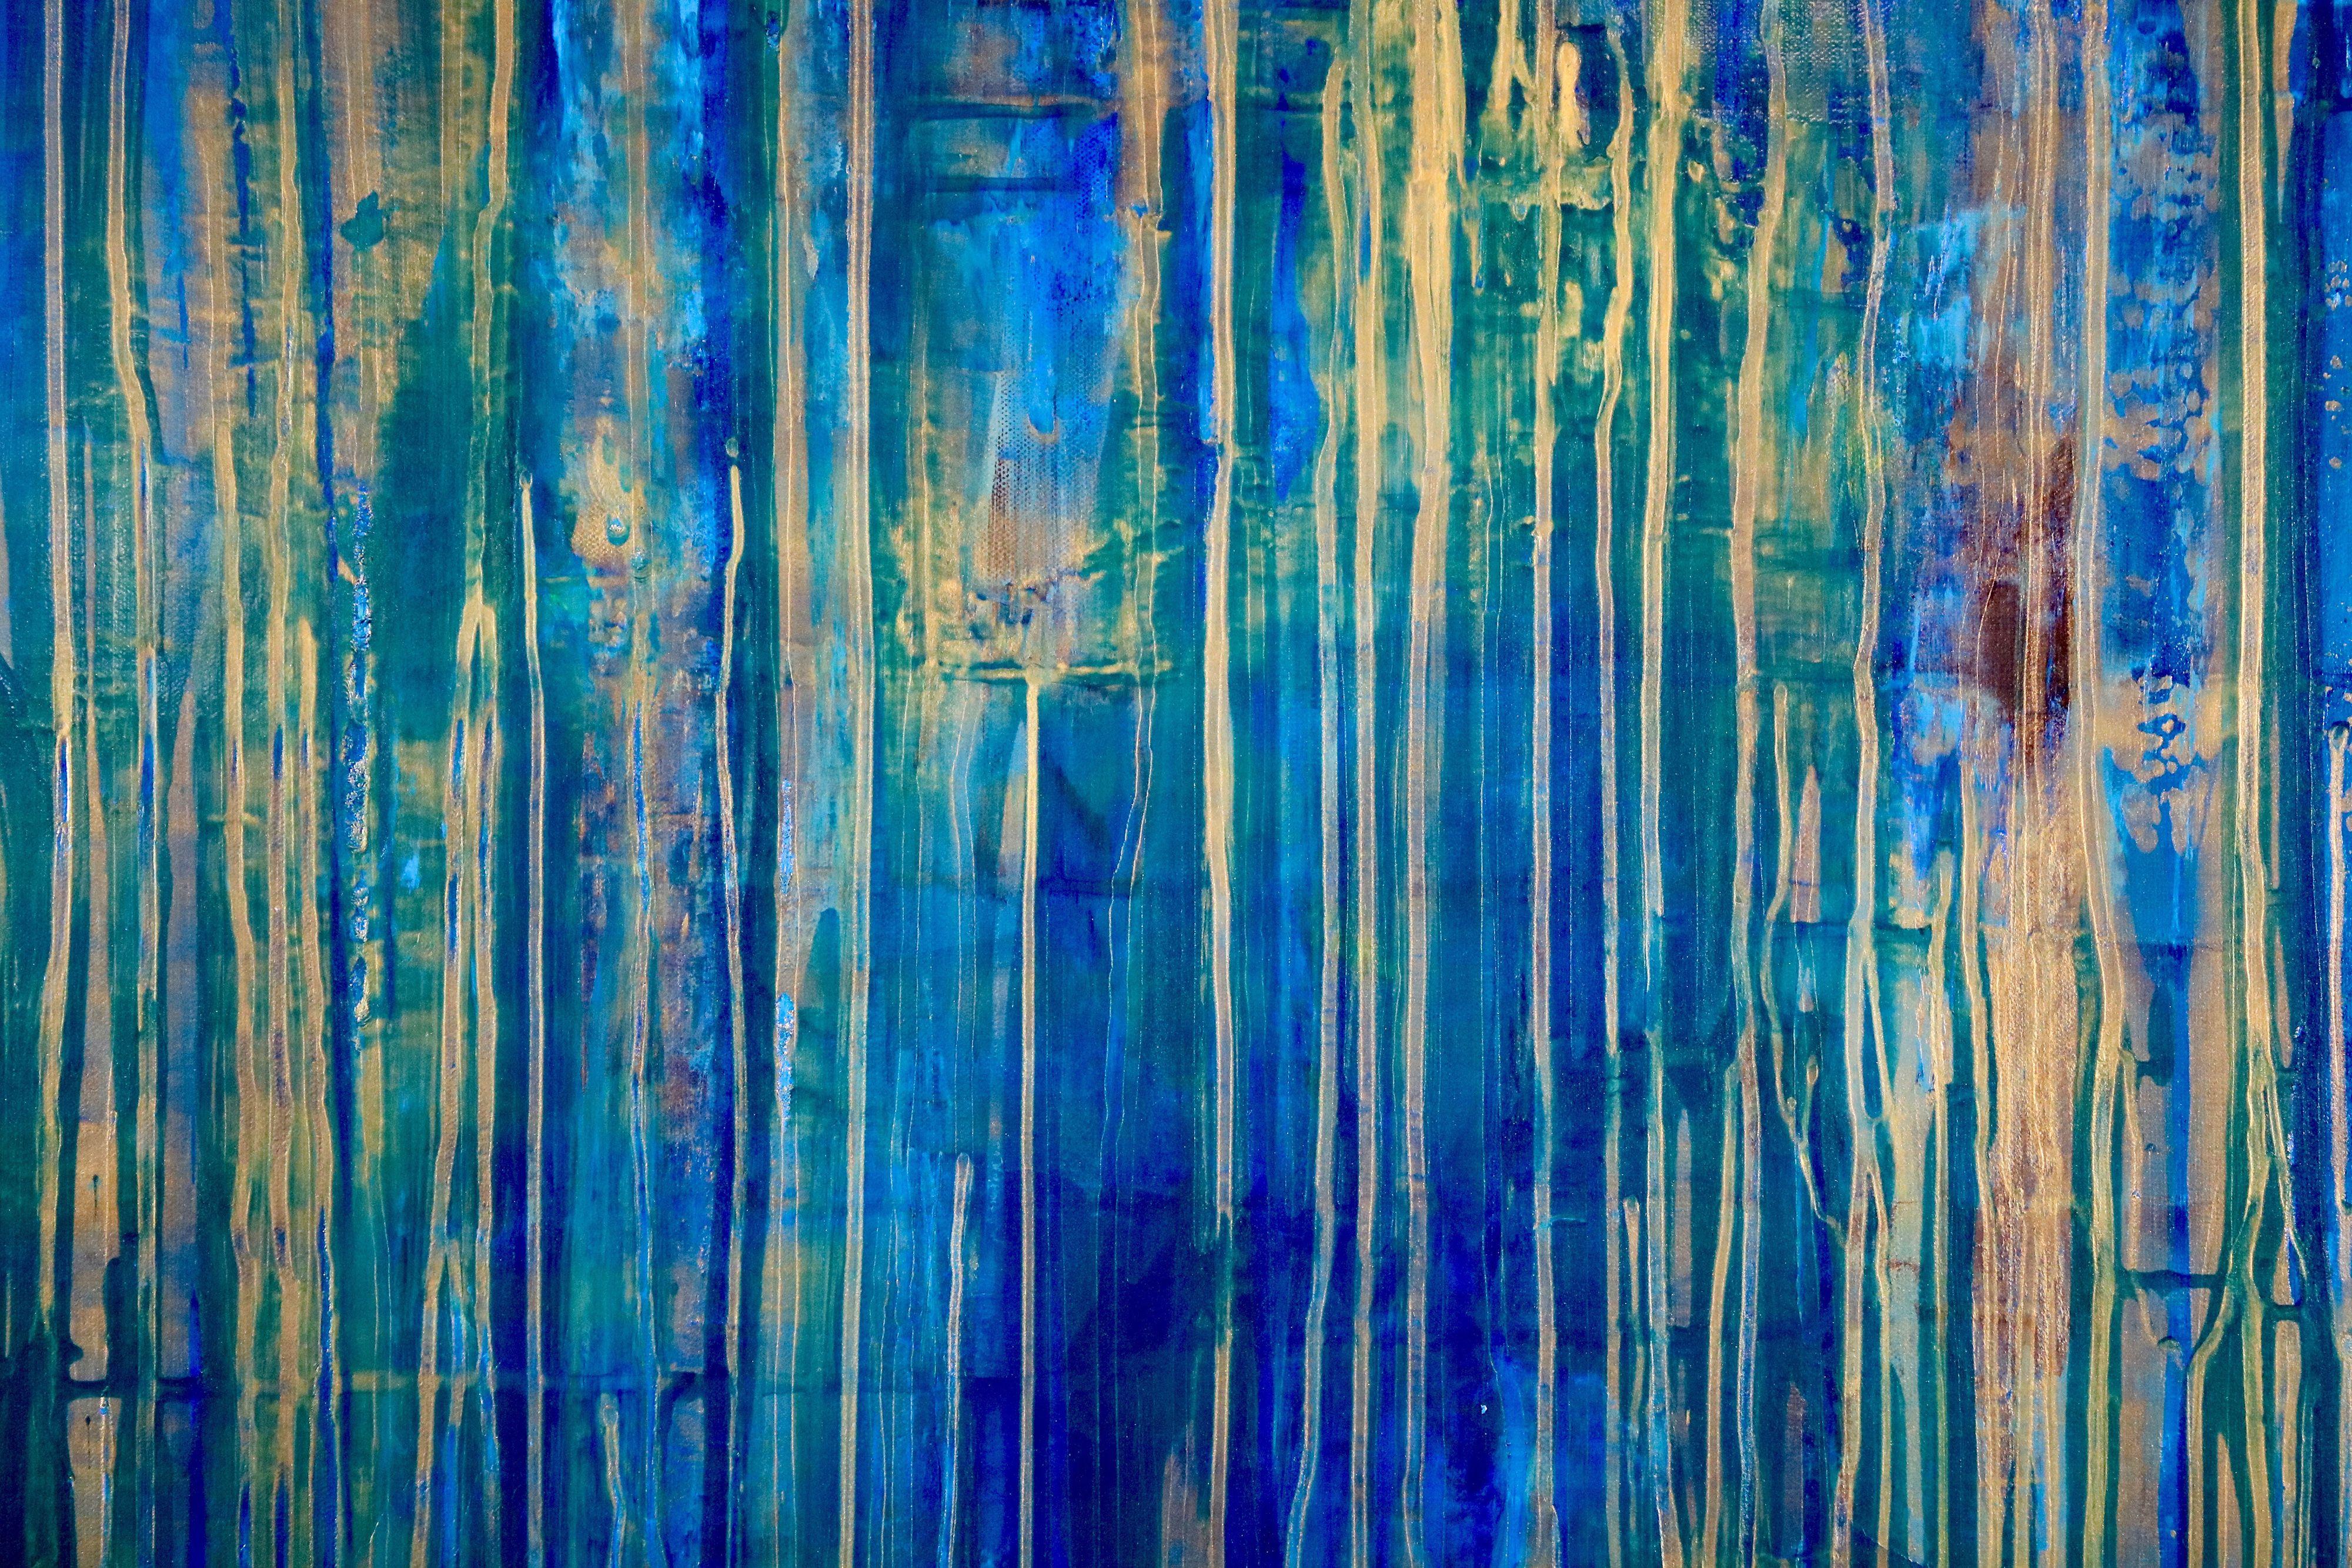 Out of the water (night of thunder), Painting, Acrylic on Canvas - Blue Abstract Painting by Nestor Toro